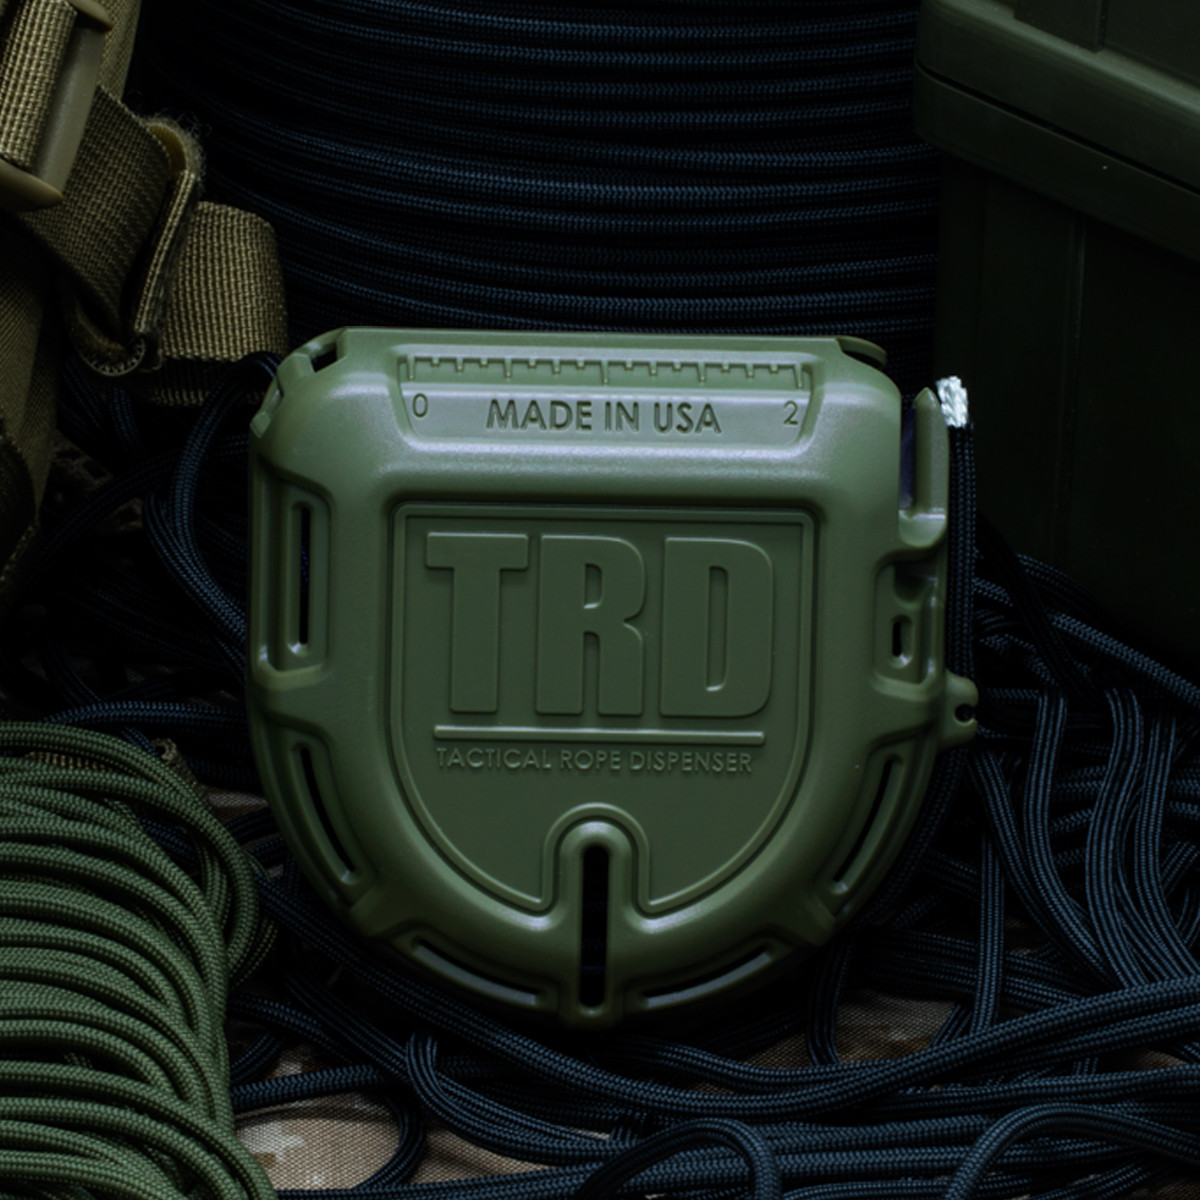 Atwood Rope TRD Tactical Rope Dispenser - OD Green